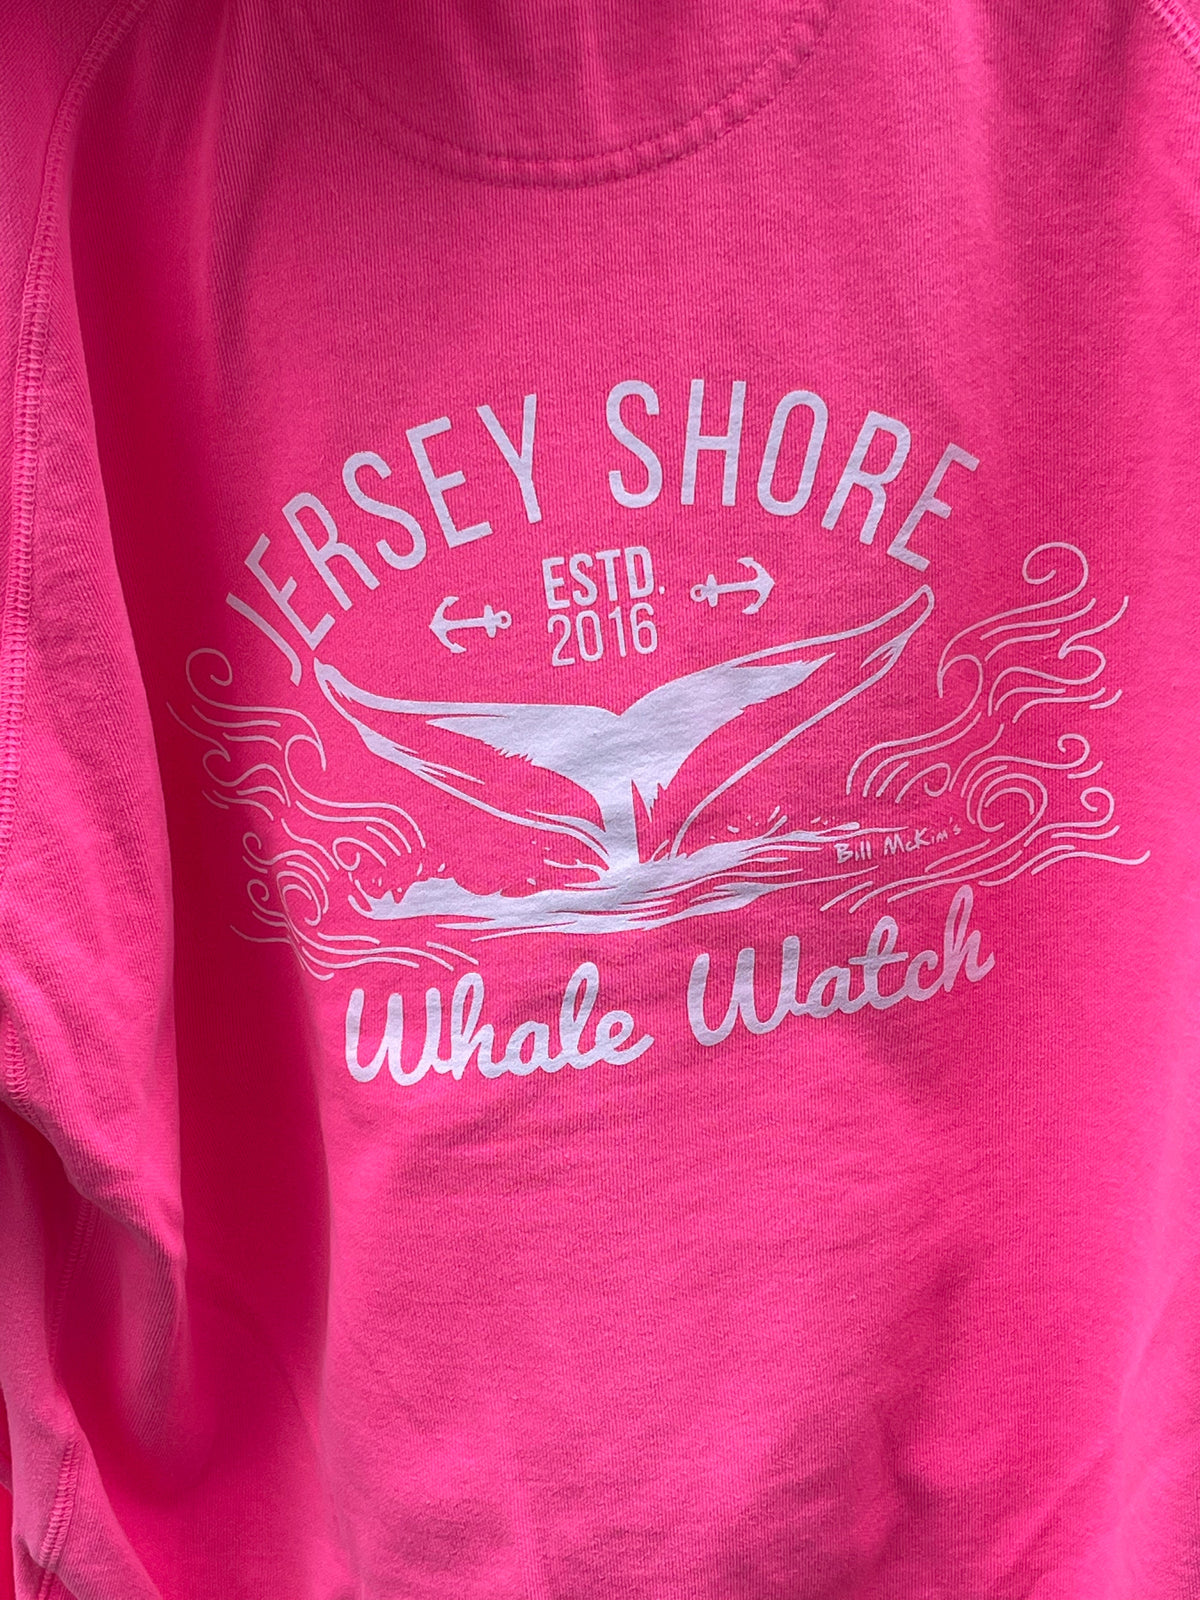 Ladies sizes only Jersey Shore Whale Watch V neck Hooded Sweatshirt new for 2022 Bill McKim Photography 